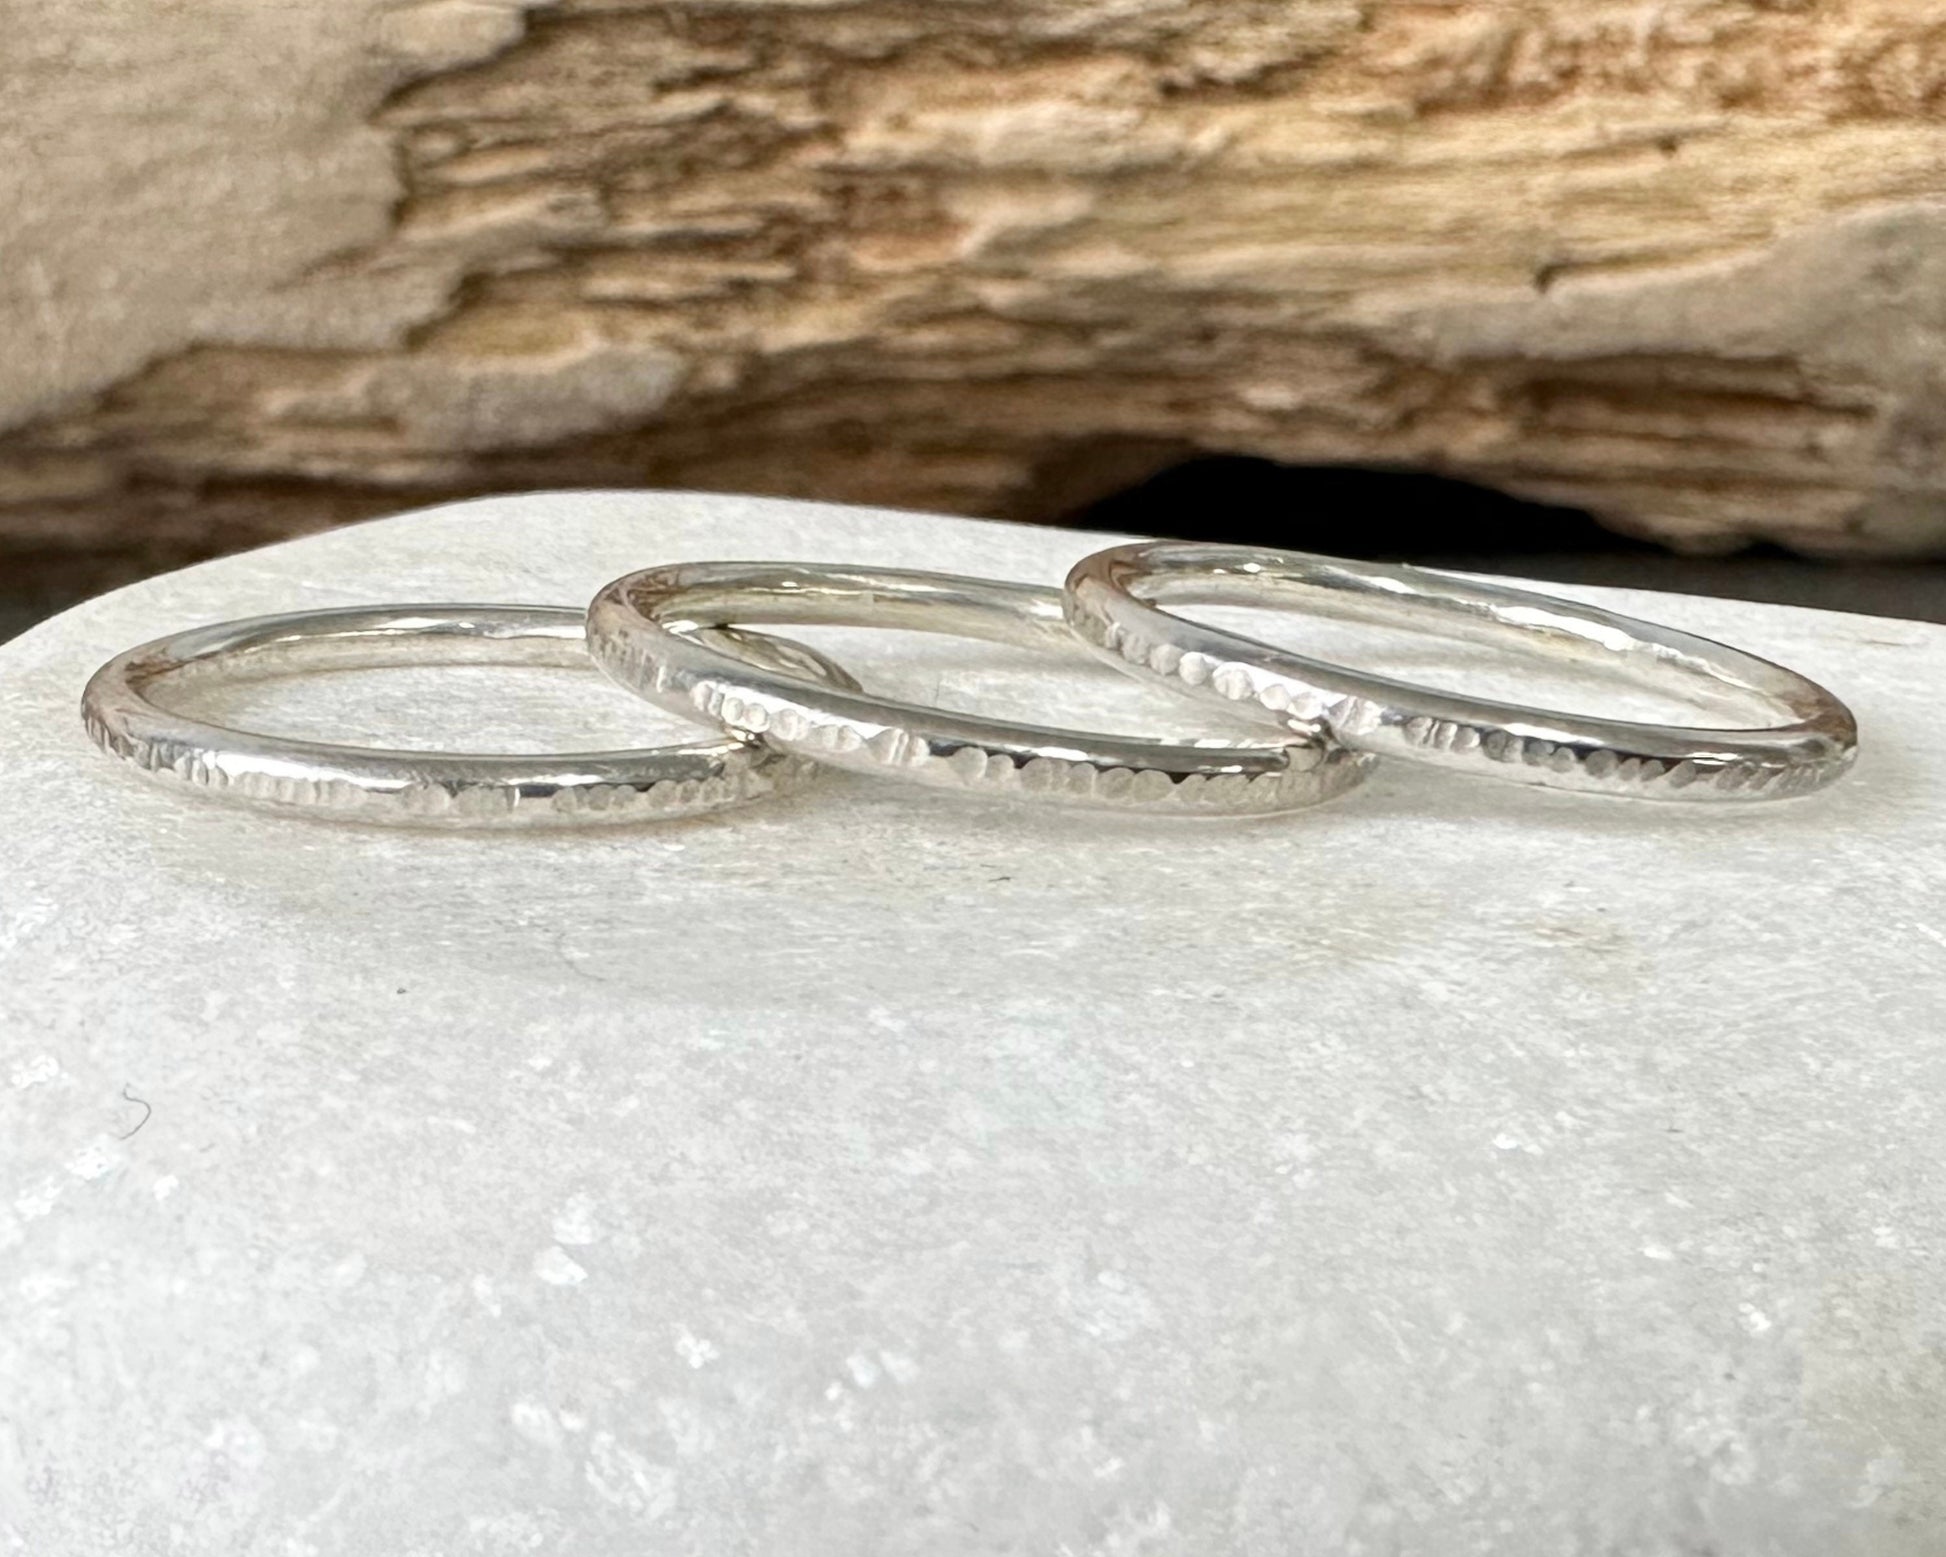 Set of three Shiny 1.8mm 925 Sterling Silver Stacking Rings, Ripple Hammered Effect Minimalist Ring Band, Handmade Stacking Ring